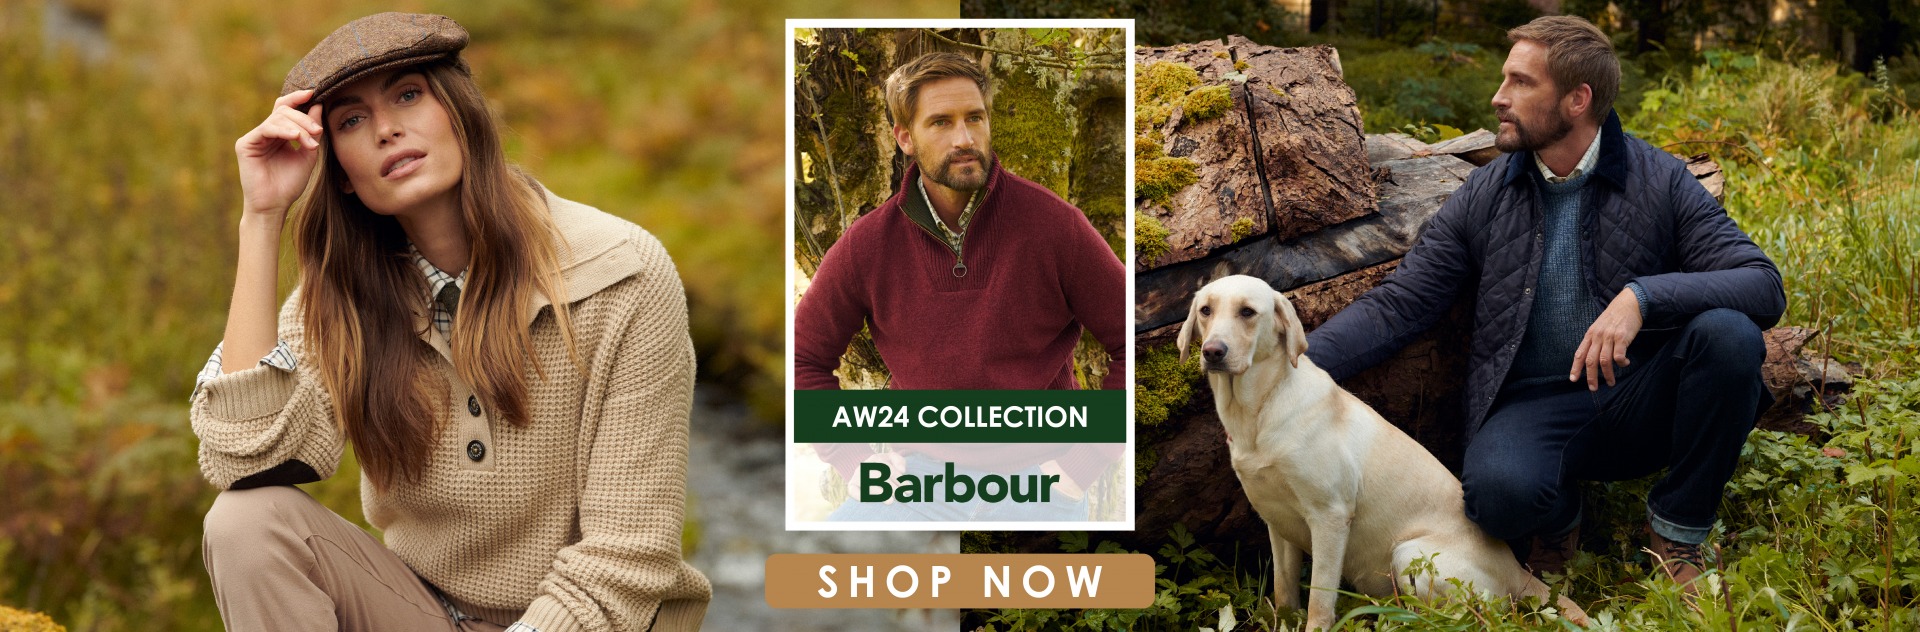 BARBOUR AW24